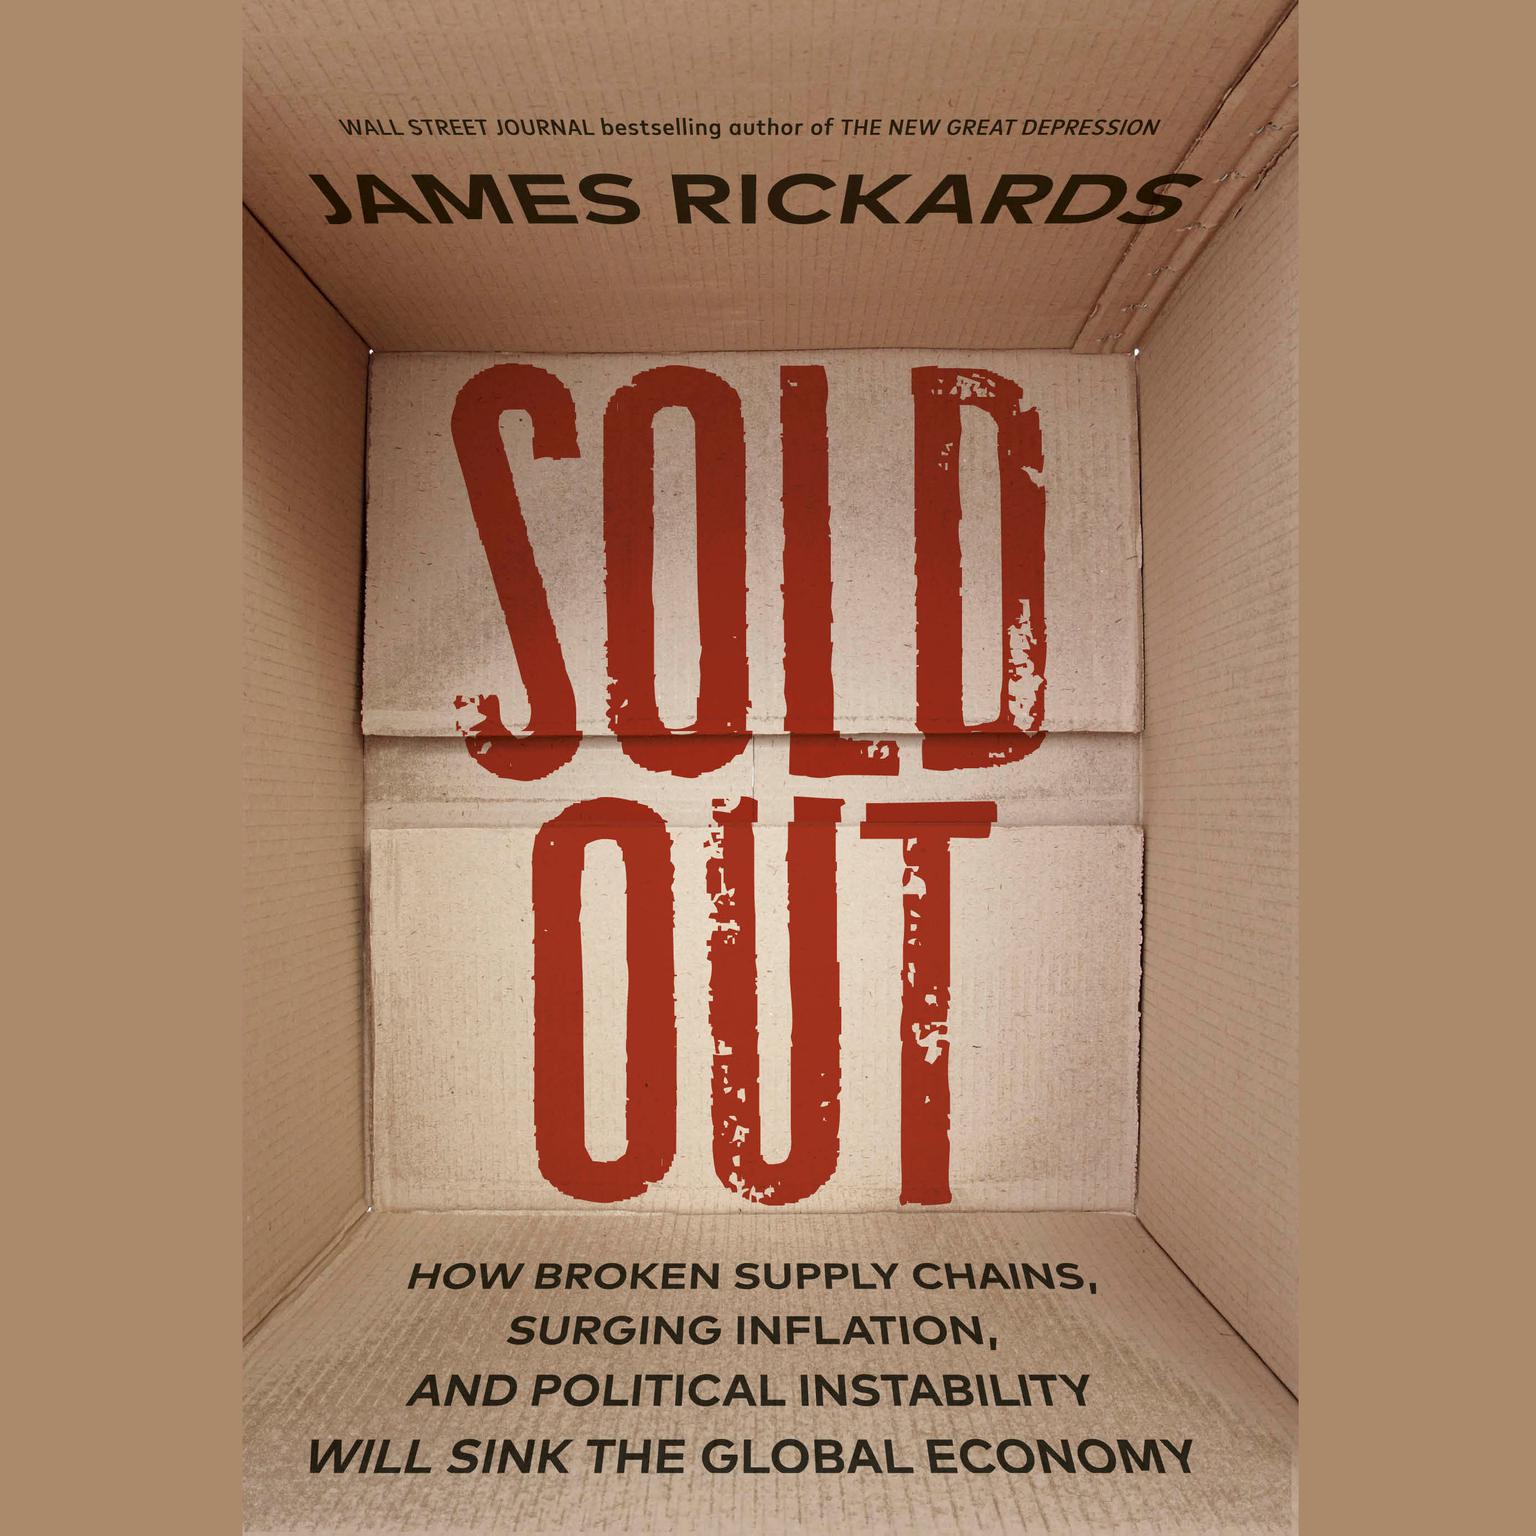 Sold Out: How Broken Supply Chains, Surging Inflation, and Political Instability Will Sink the Global Economy Audiobook, by James Rickards